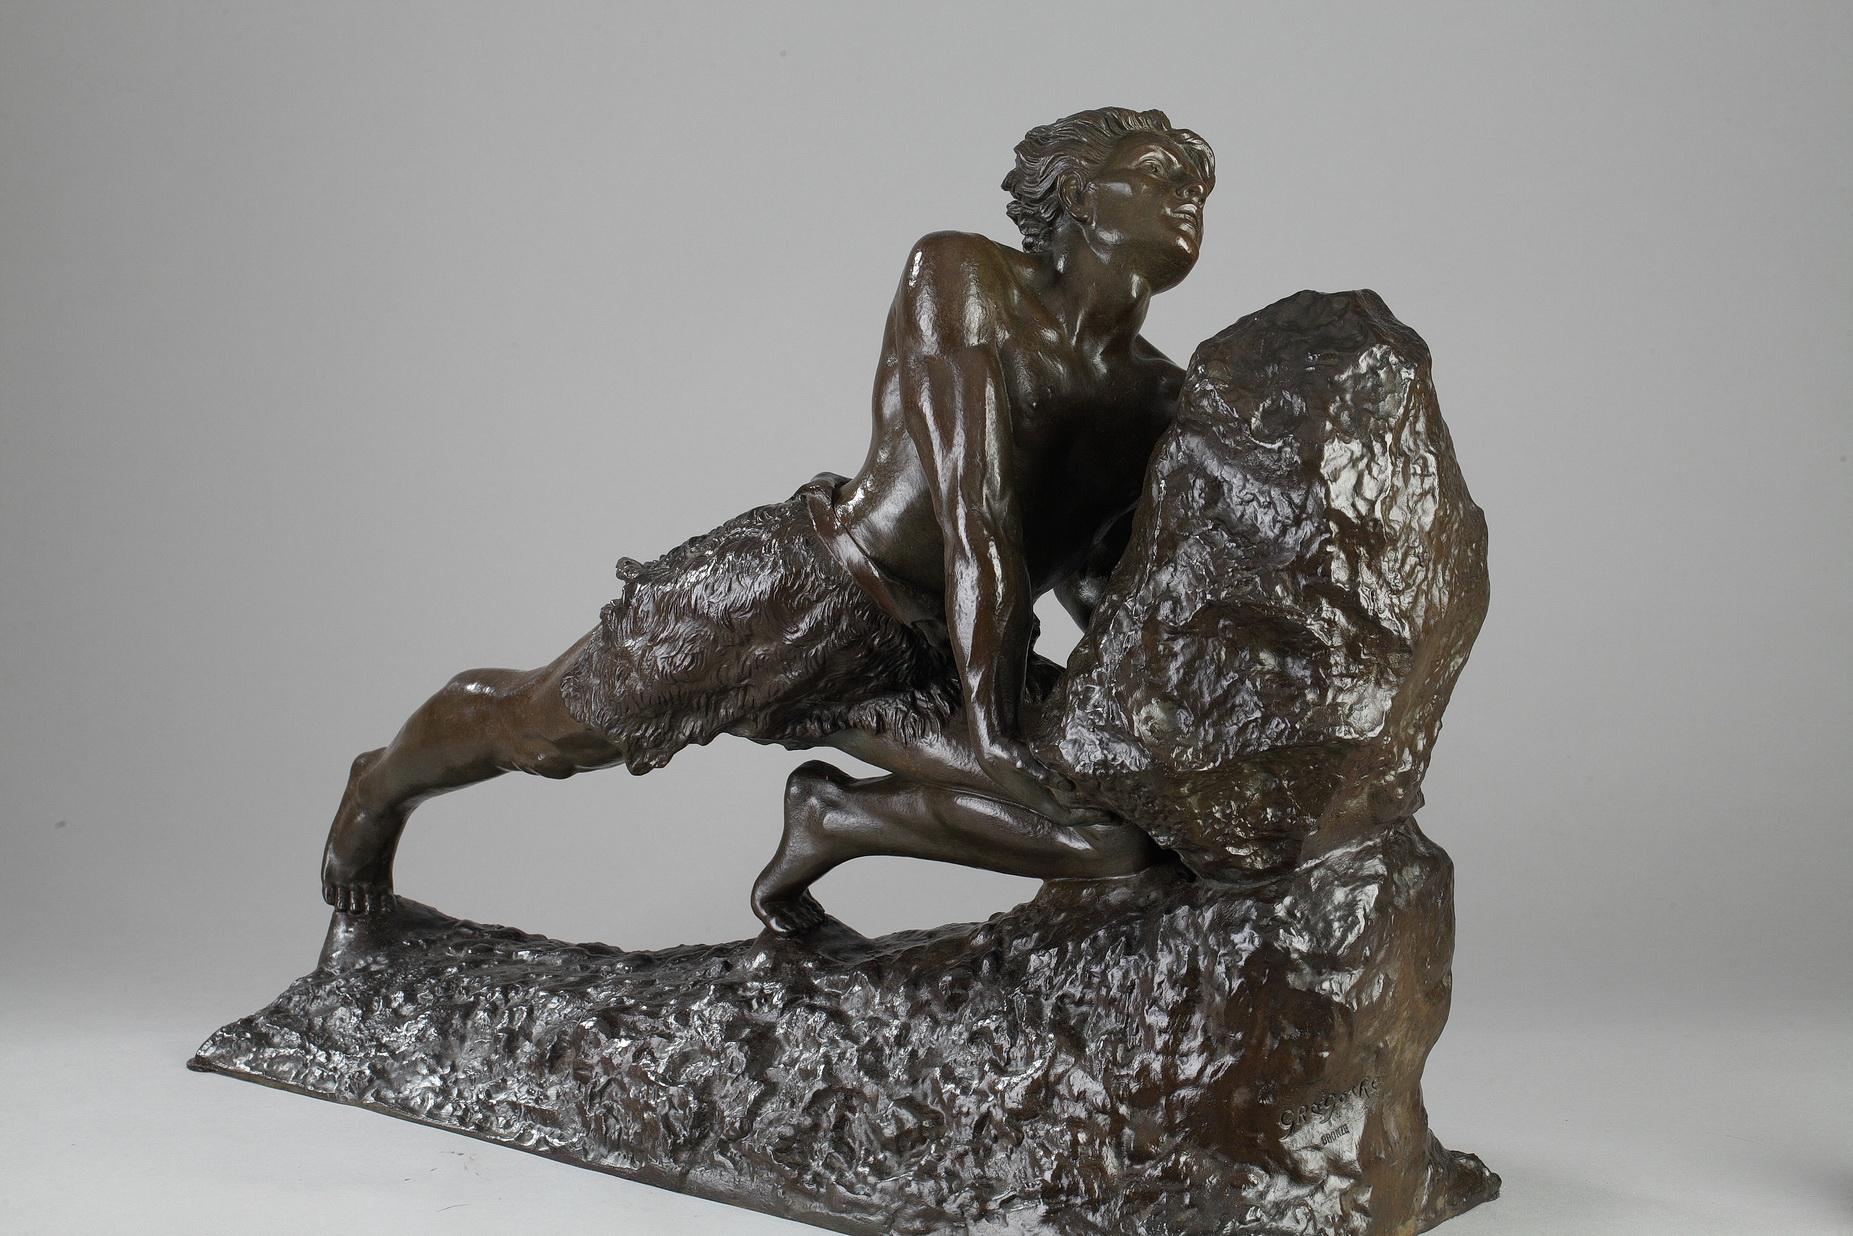 Large, patinated bronze sculpture featuring Sisyphus pushing his boulder up a hill. He was condemned to push the boulder up the hill, only to watch it roll back again and then begin the task again, for eternity. This Greek tale of futility